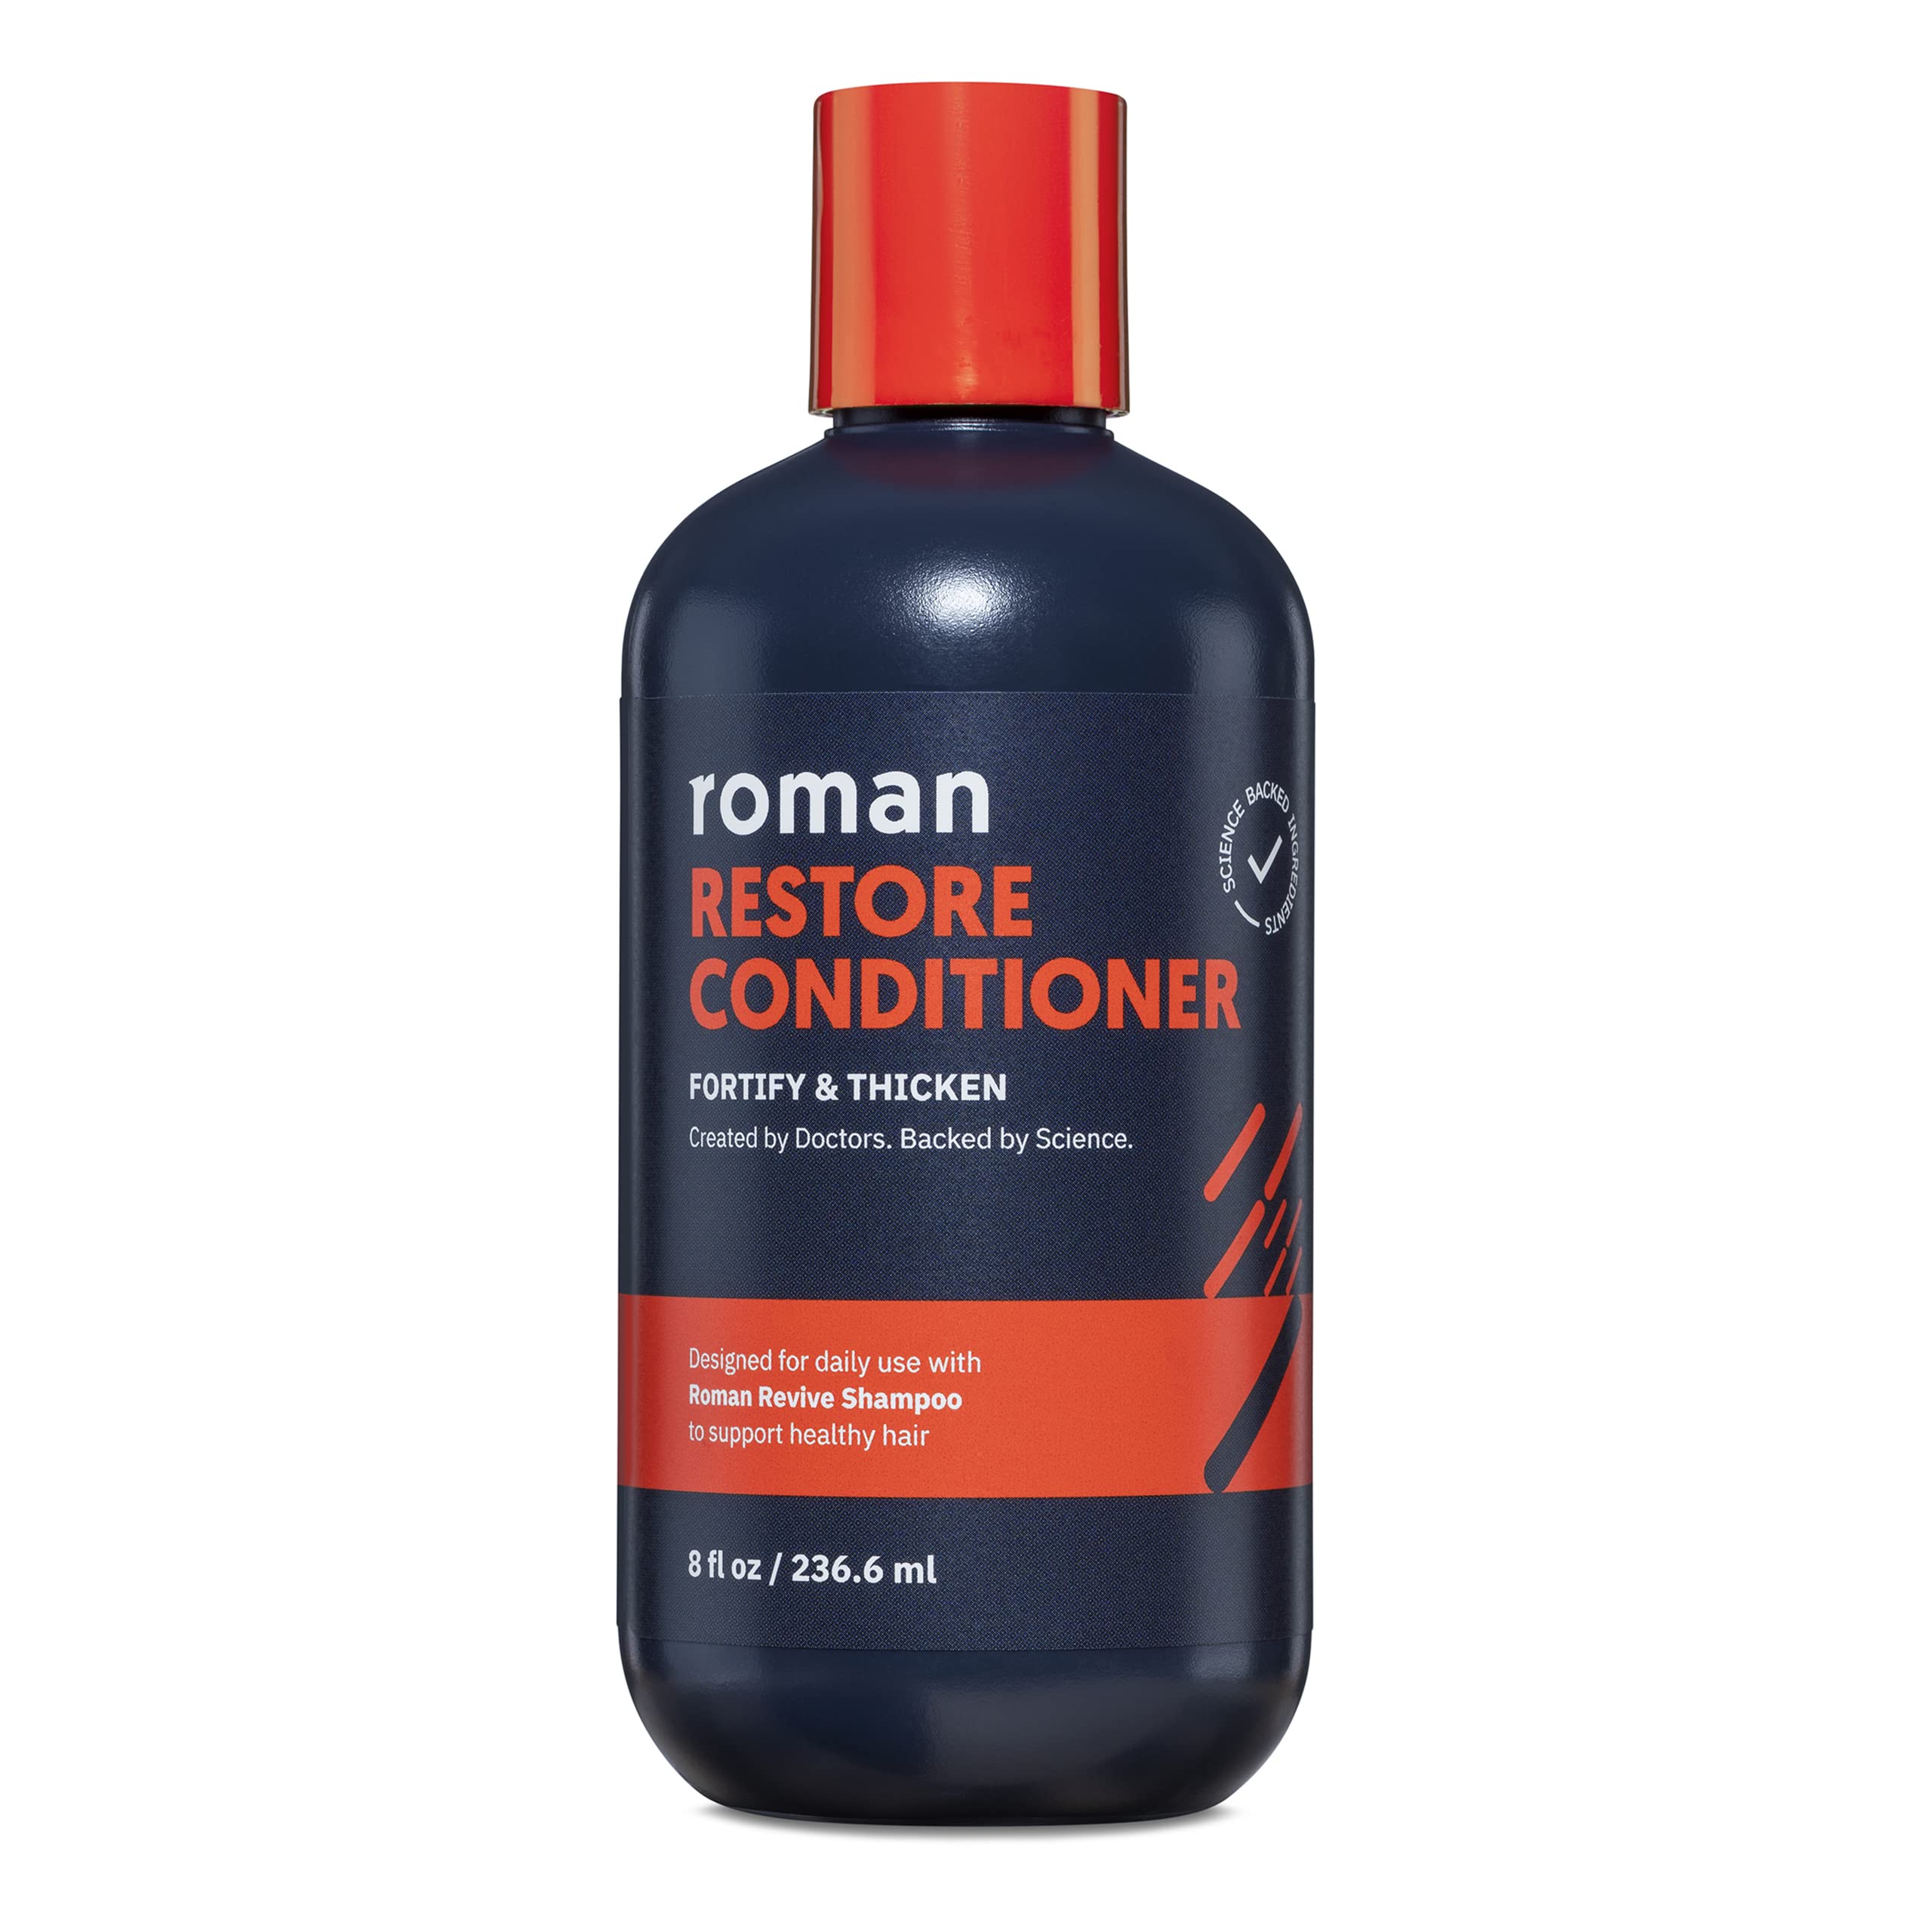 Roman Men's Restore Conditioner with Ingredients to Fortify and Moisturize Hair | With plant proteins, coconut oil, and shea butter | Made without parabens or phthalates | 8 fl oz